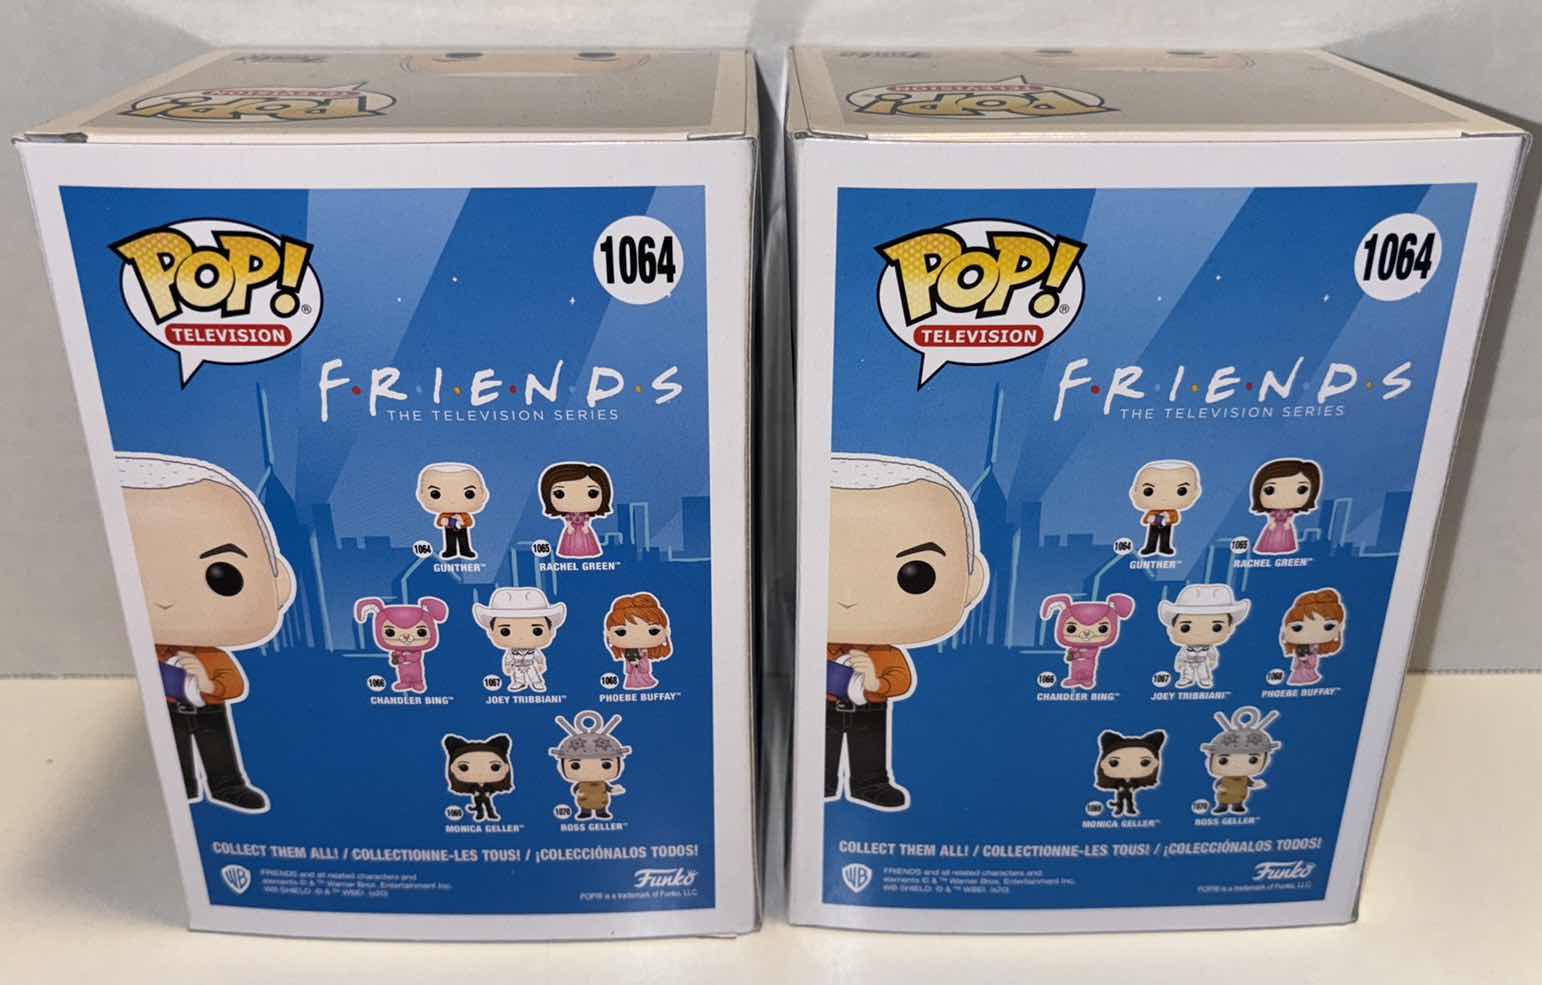 Photo 3 of NEW FUNKO POP! TELEVISION FRIENDS VINYL FIGURES 2-PACK,  #1064 GUNTHER